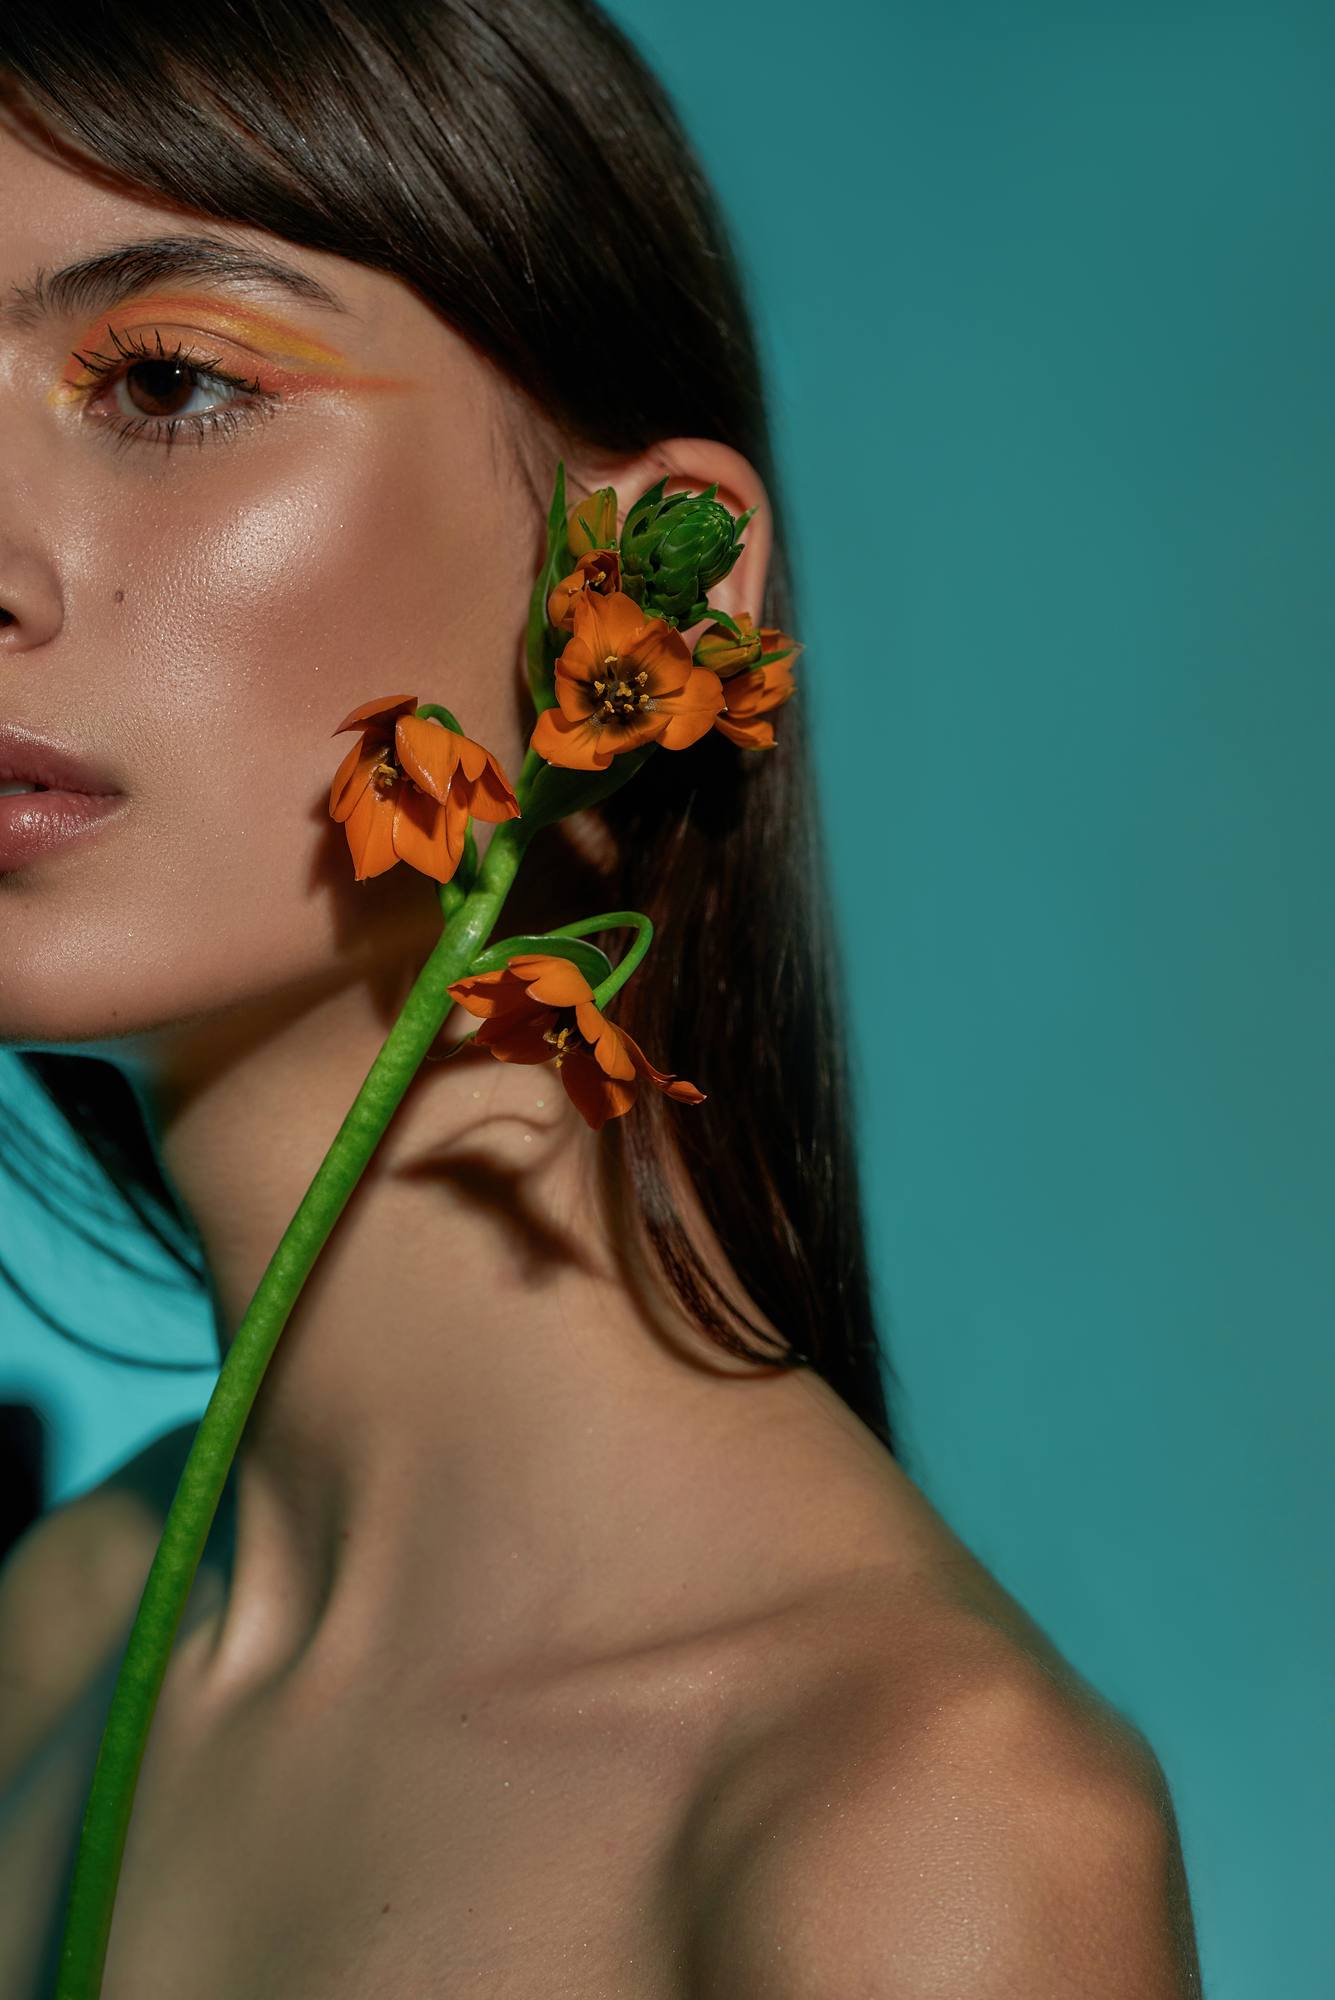 Cropped photo of a woman model reaching to her ear with a flower bud